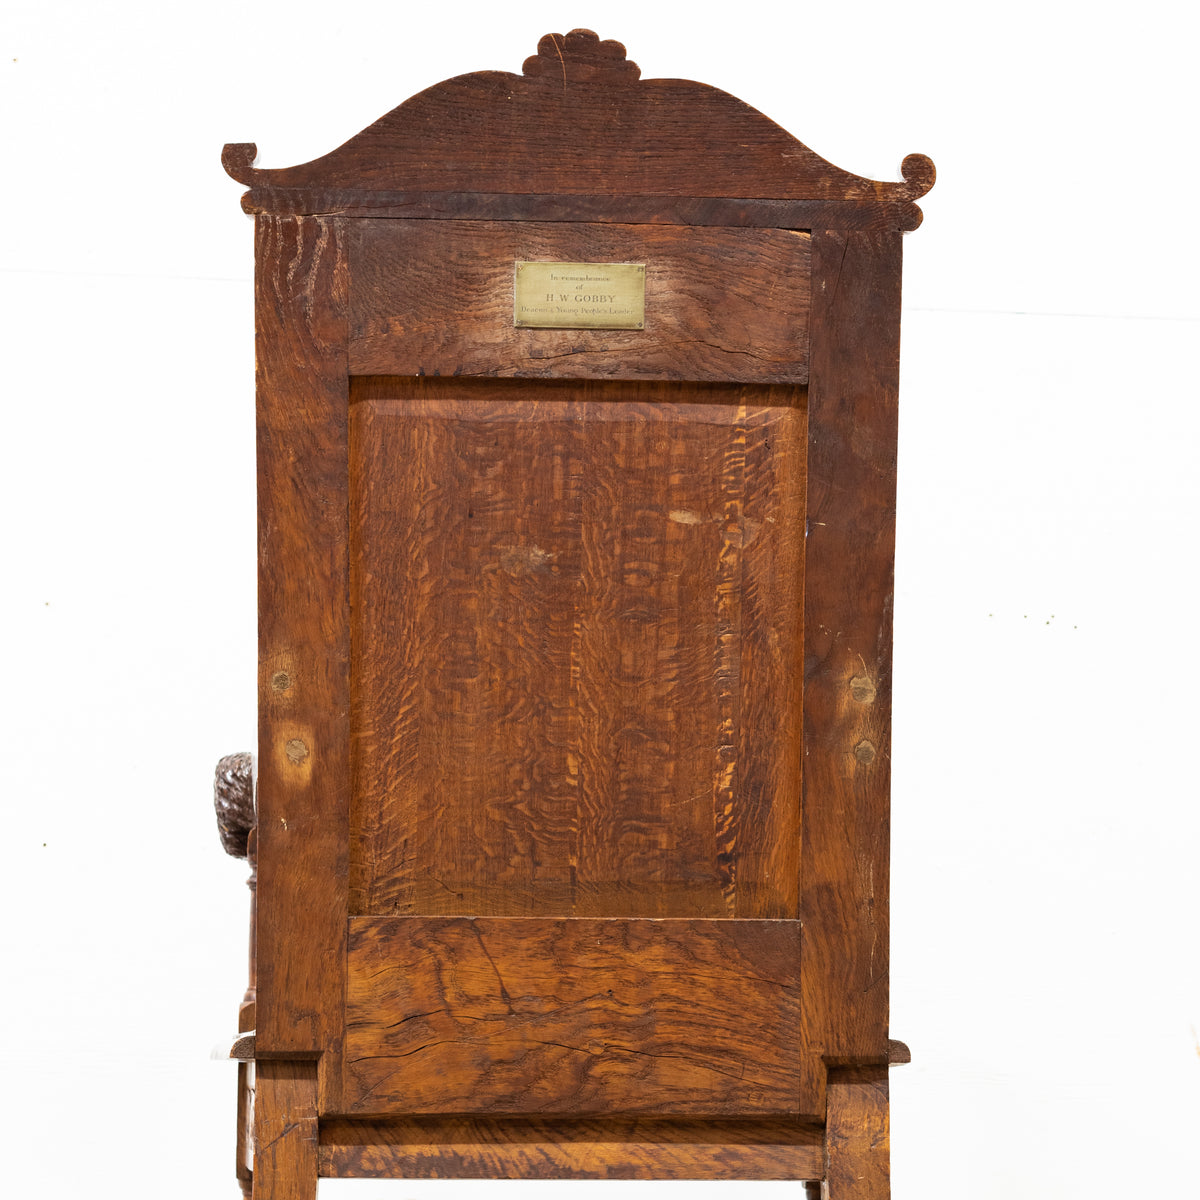 Antique Ornately Carved Wainscot Oak Chair | The Architectural Forum